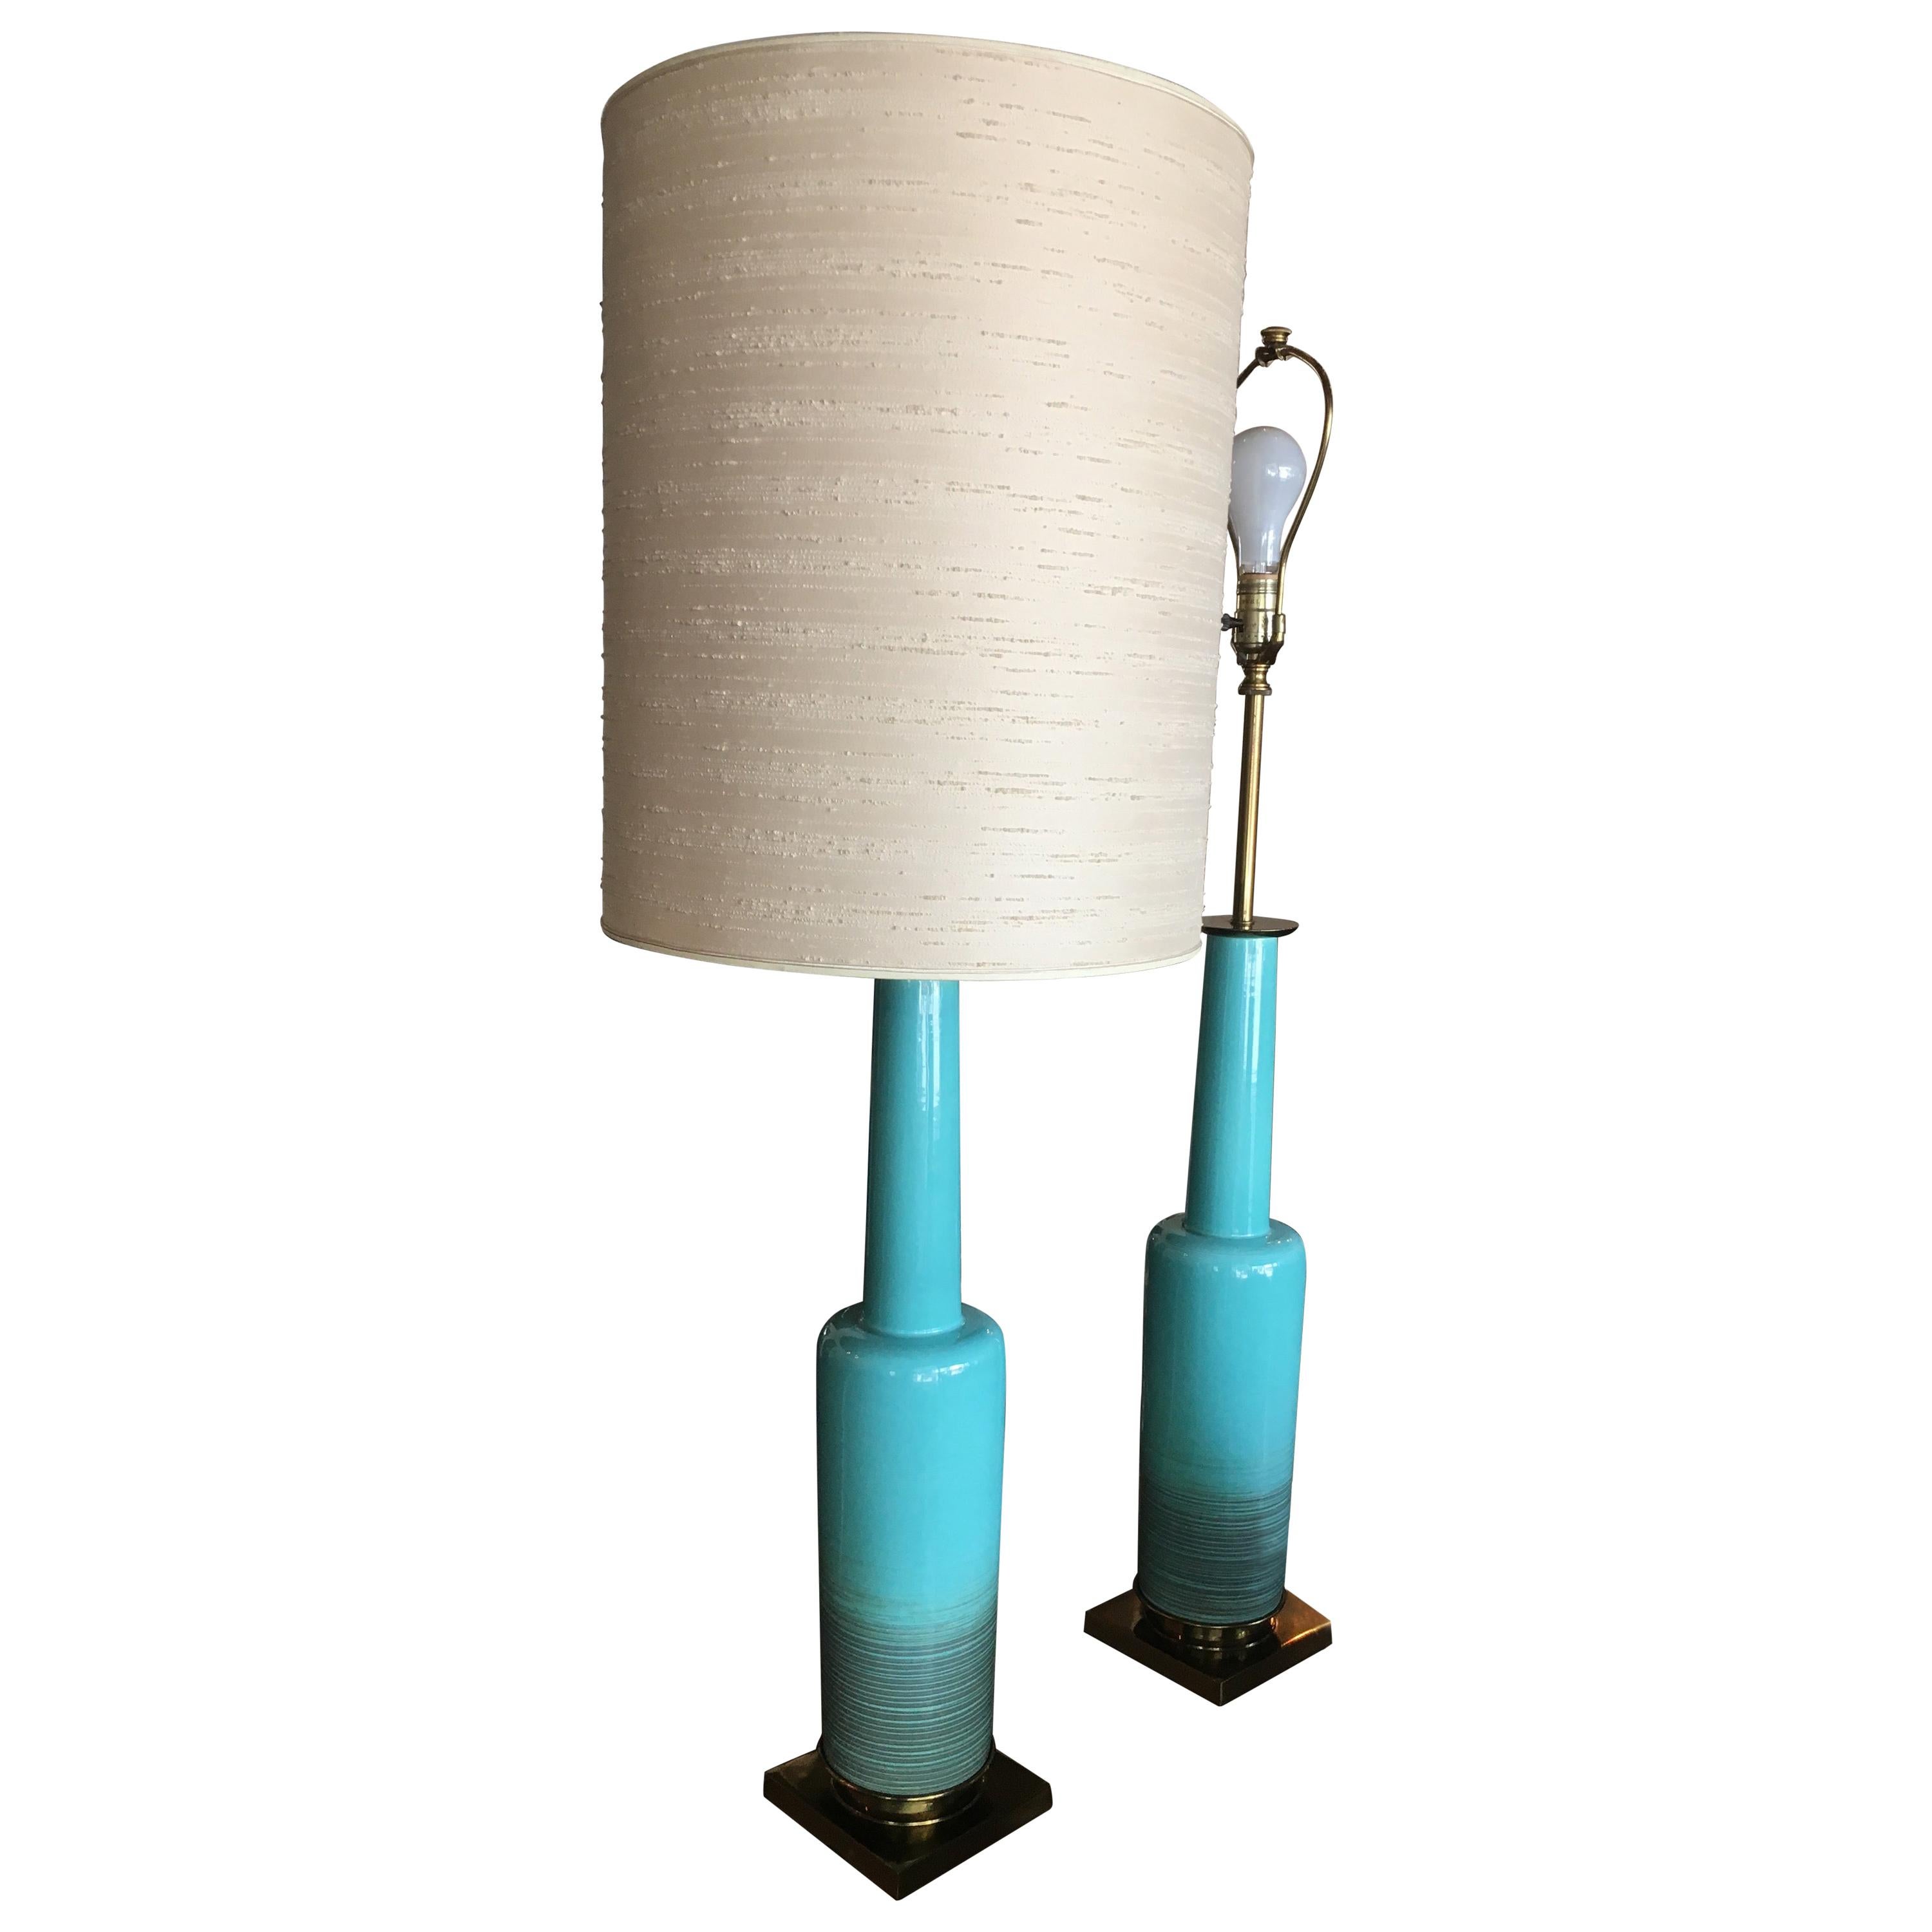 Chic and Rare Pair of Midcentury Tiffany Blue Lamps with Original Shades